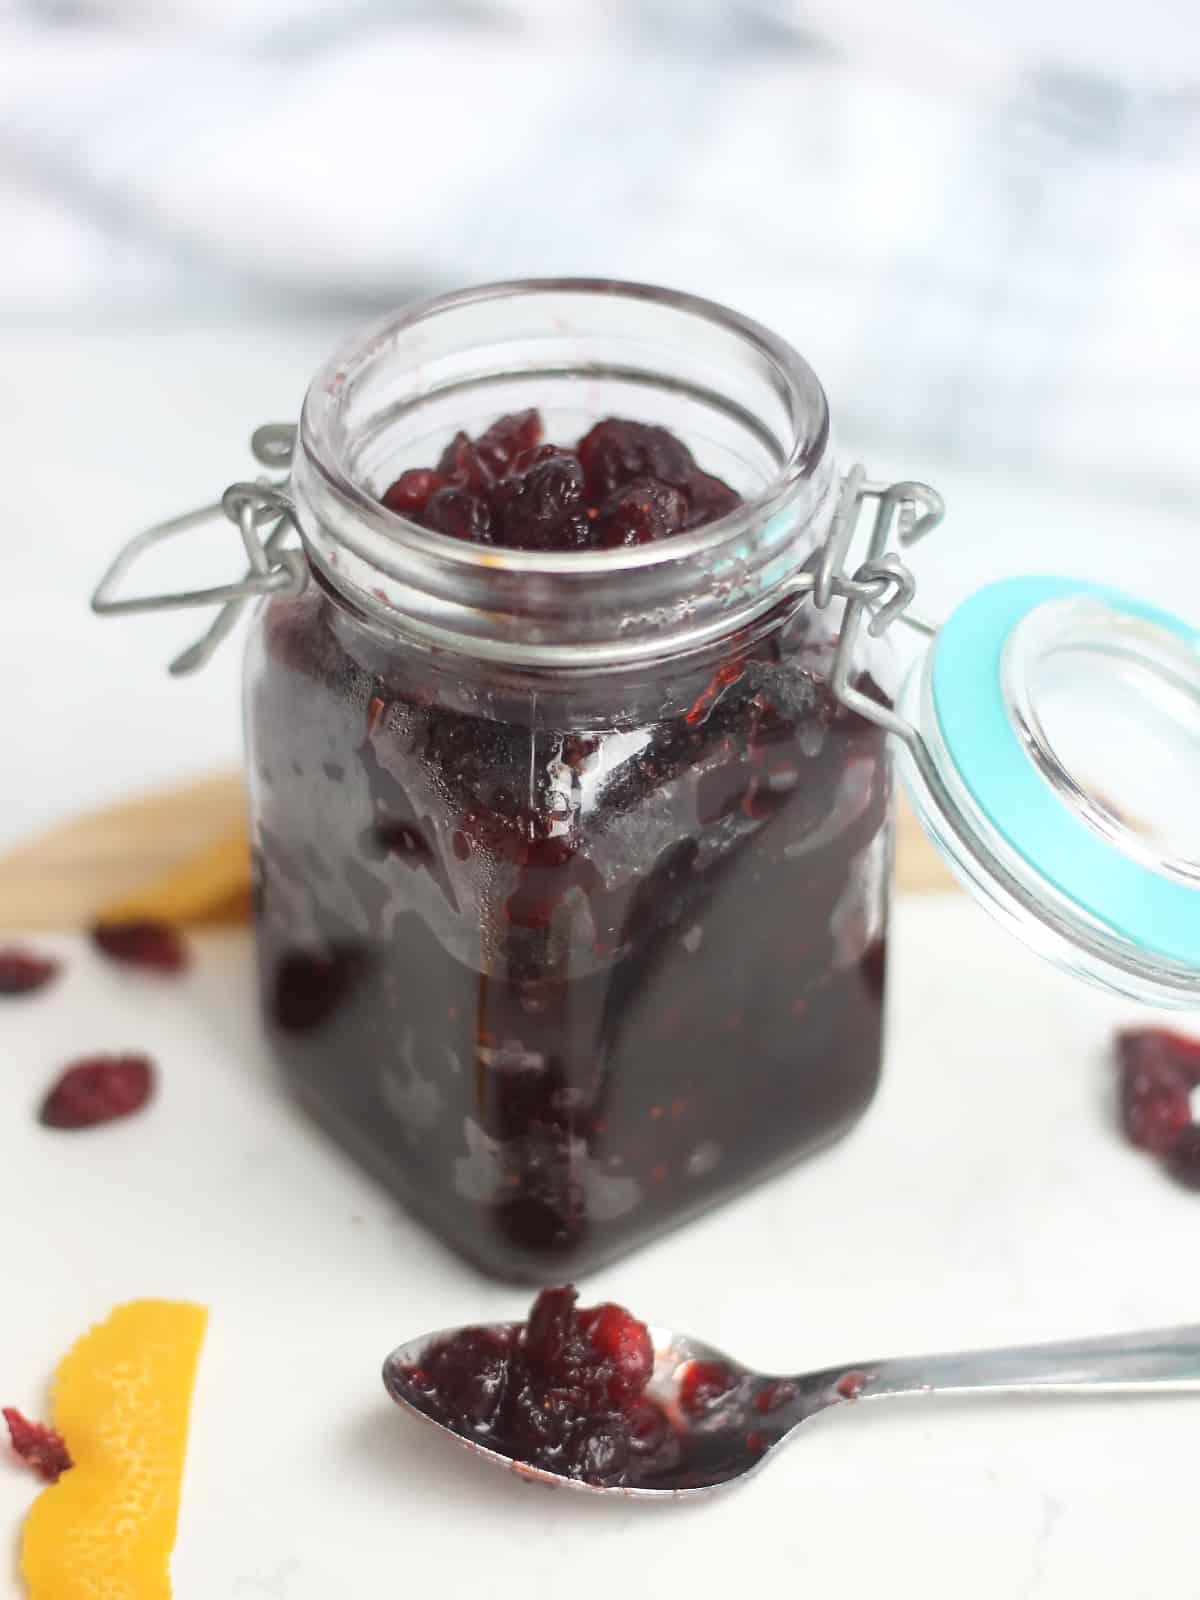 A jar of dried cranberry sauce with some on a teaspoon next to it.